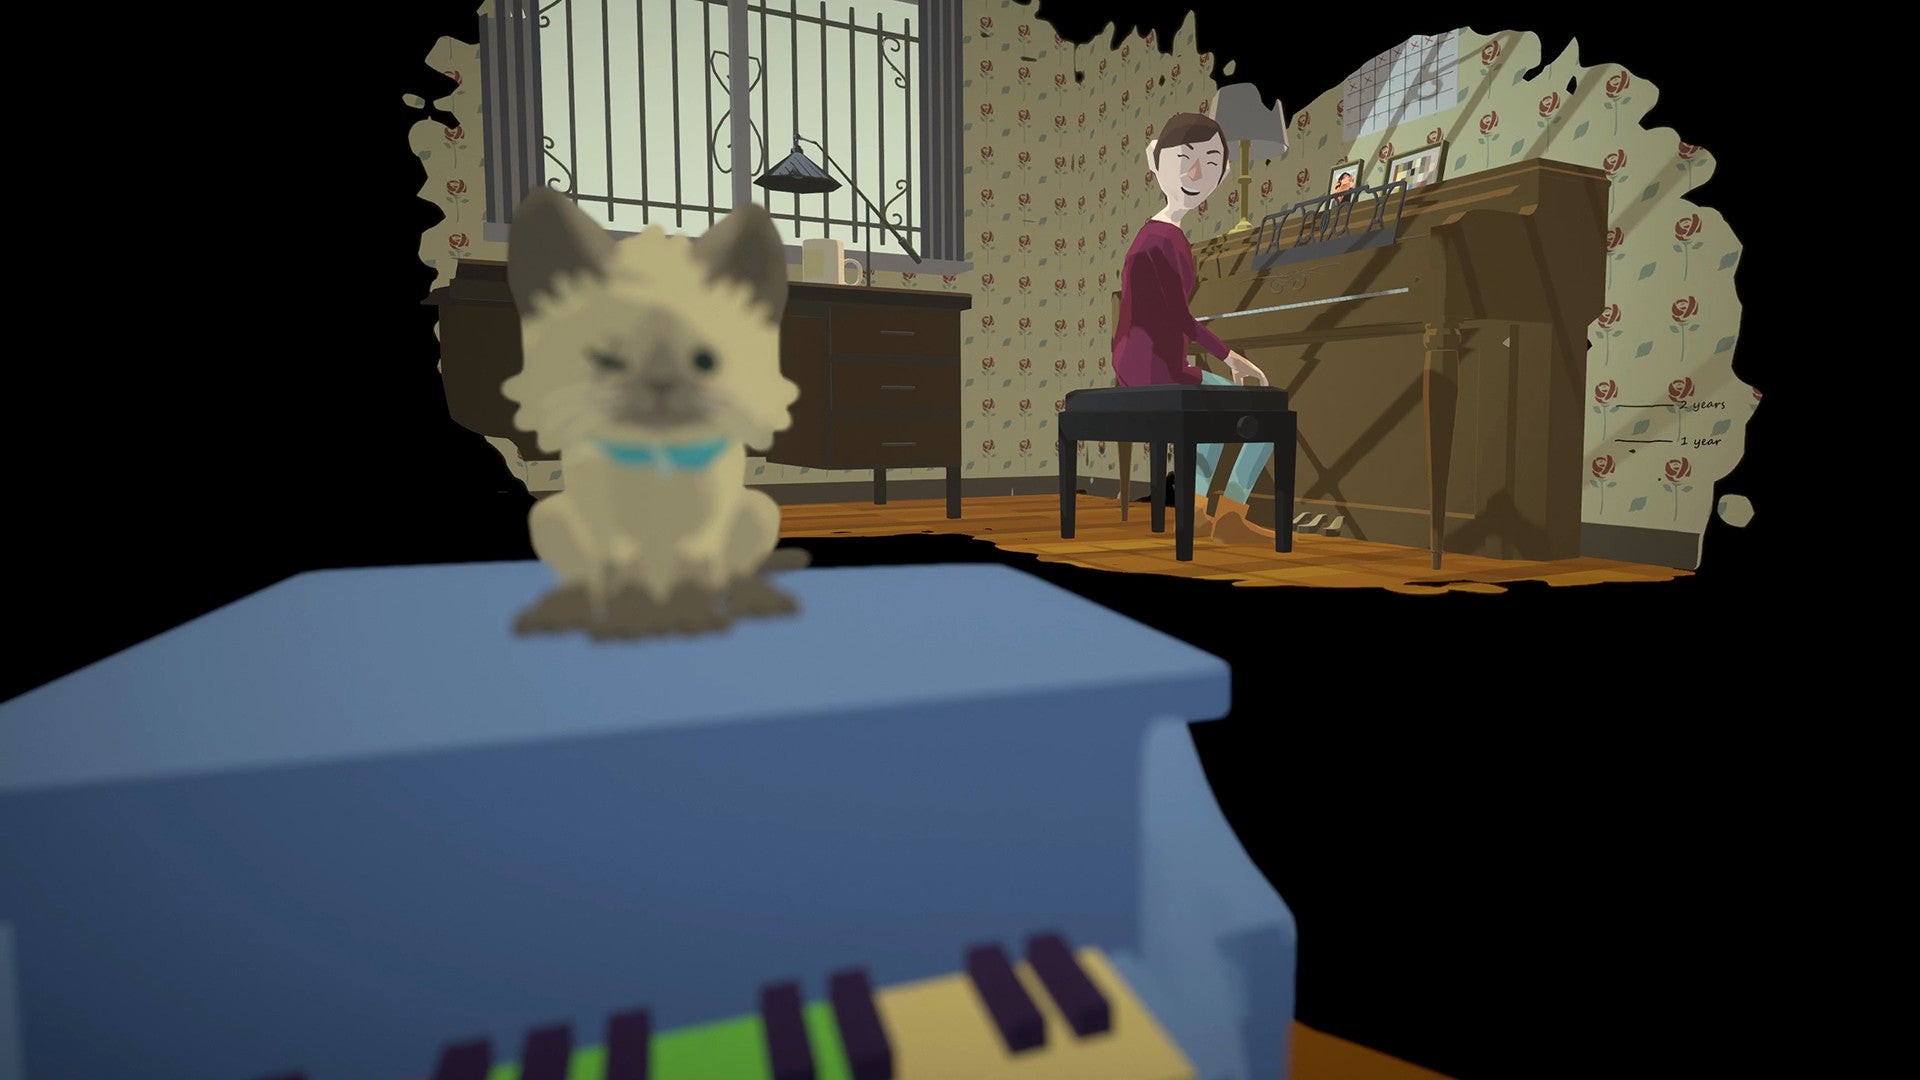 An image from Before Your Eyes which shows a cute cat on a mini-piano, while another figure in the background looks back at it, smiles, and plays a piano.